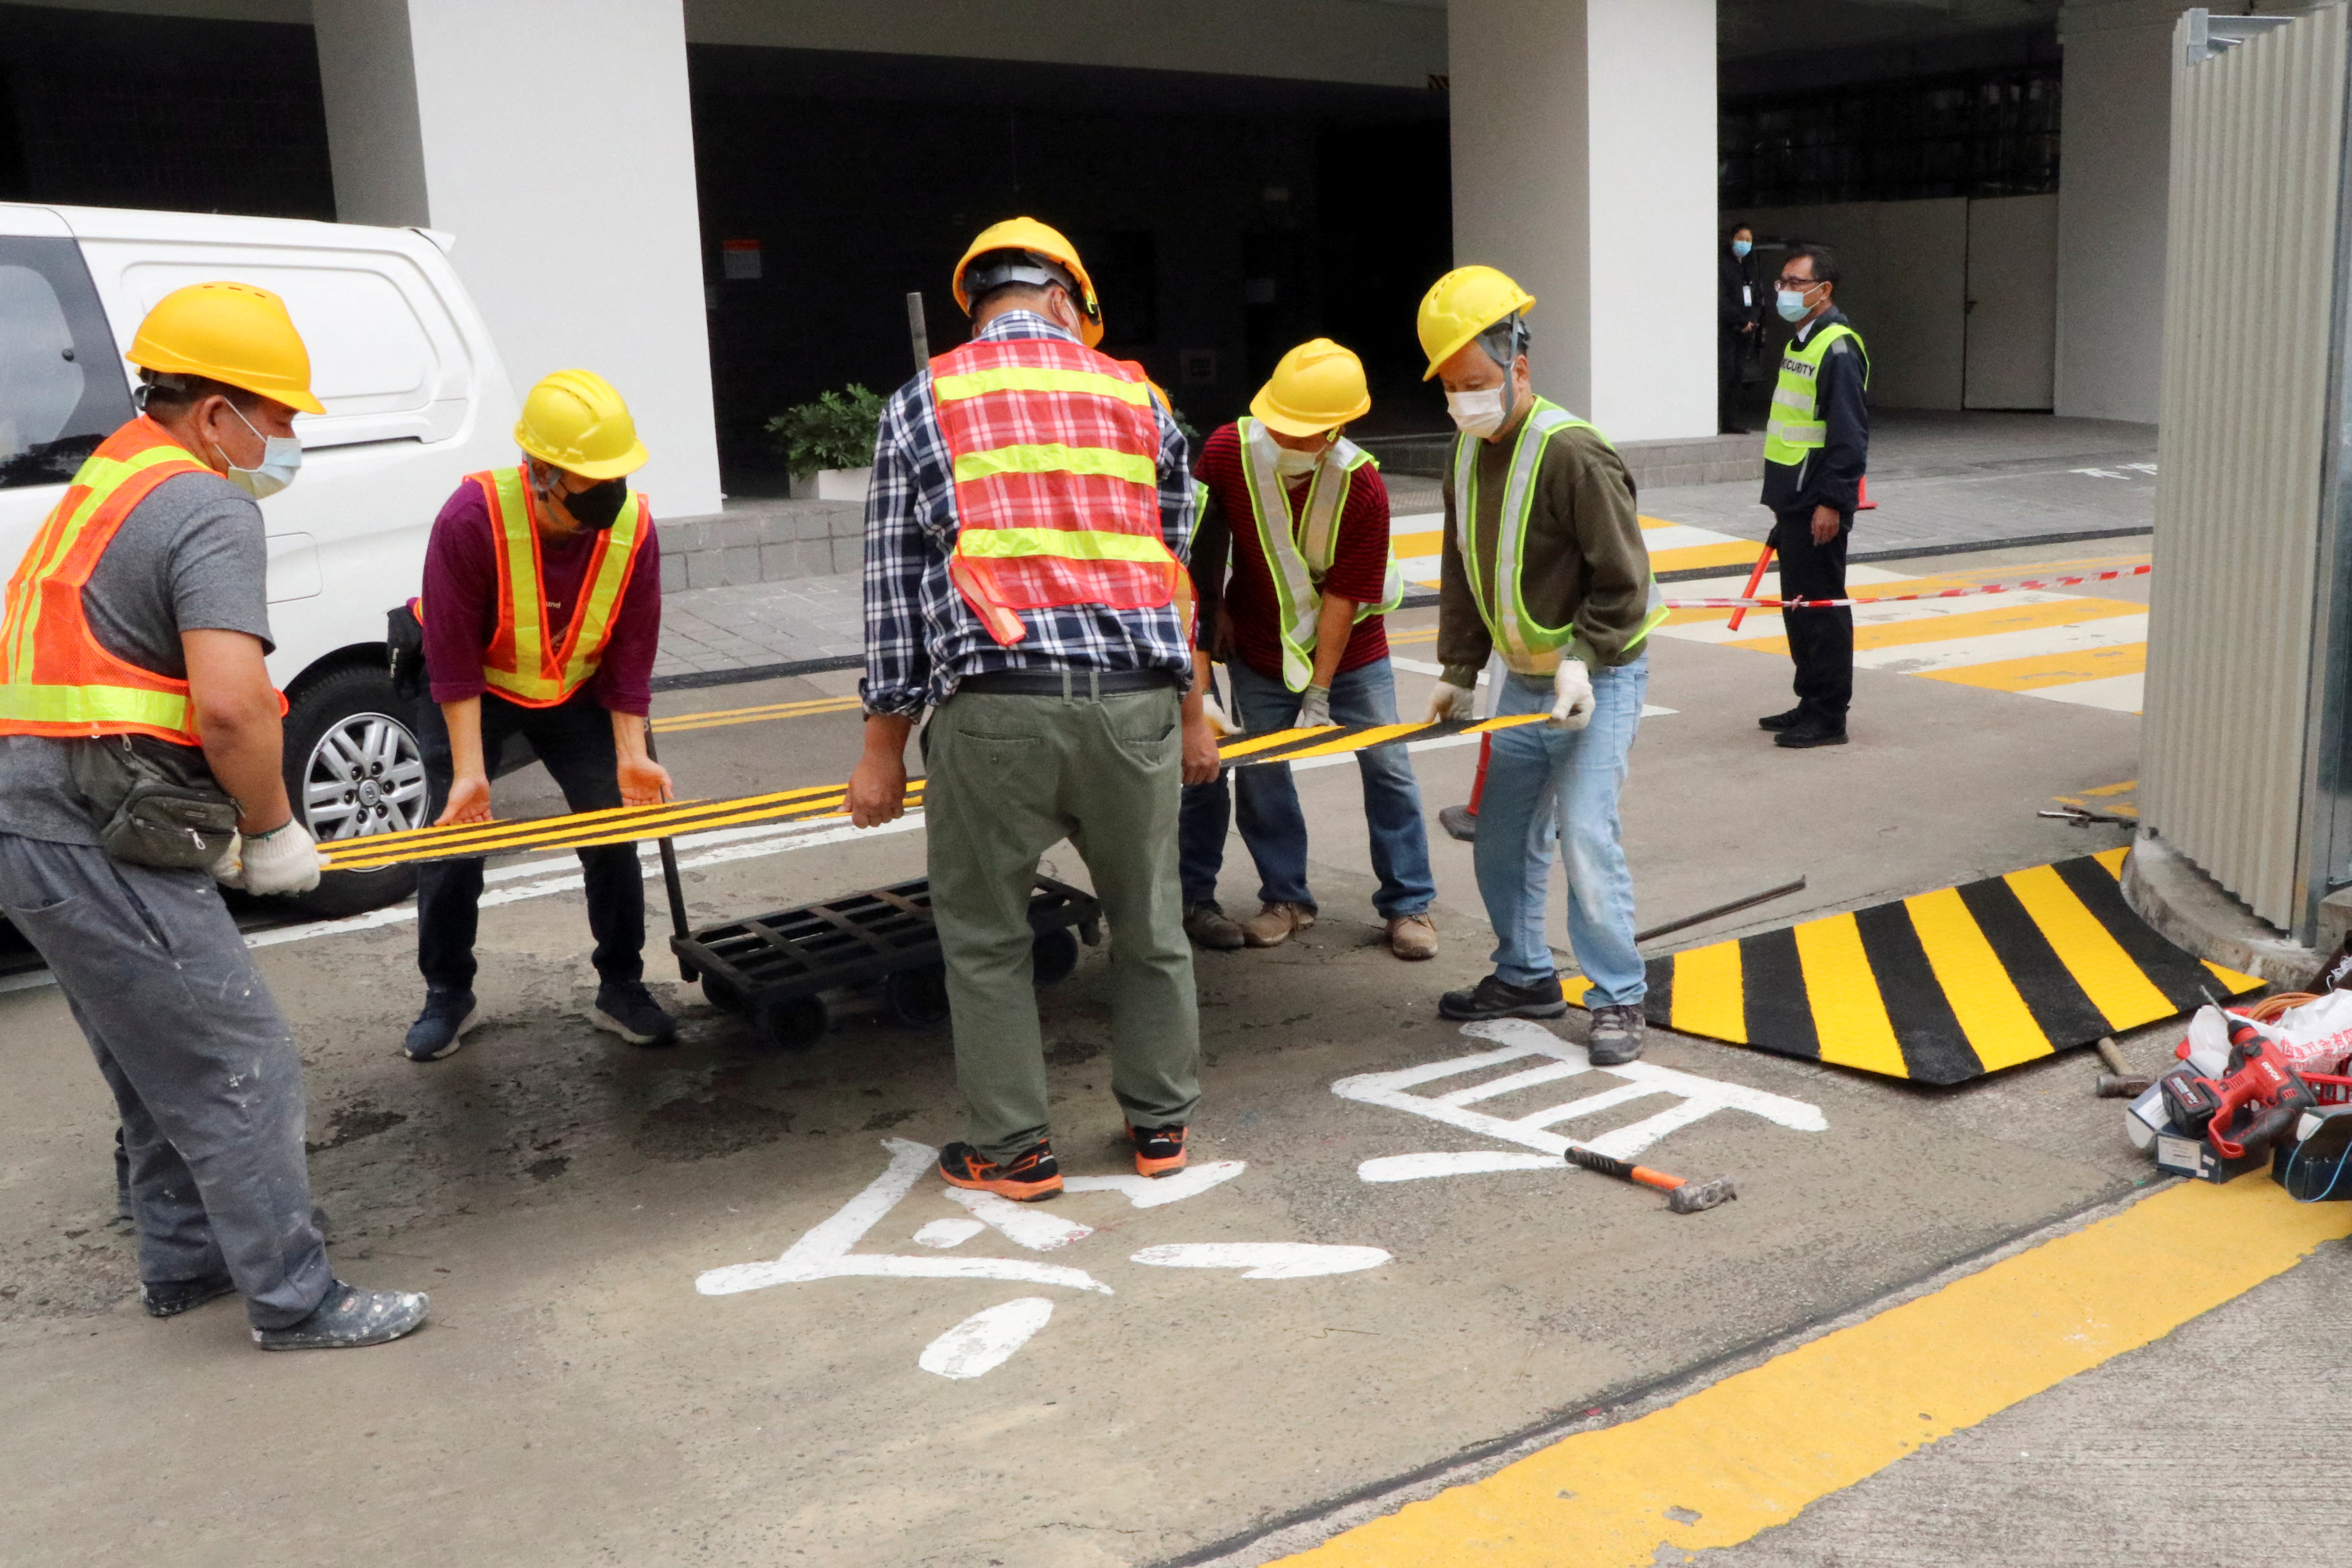 Construction workers cover parts of a painted slogan commemorating the 1989 Tiananmen Square crackdown, in Hong Kong